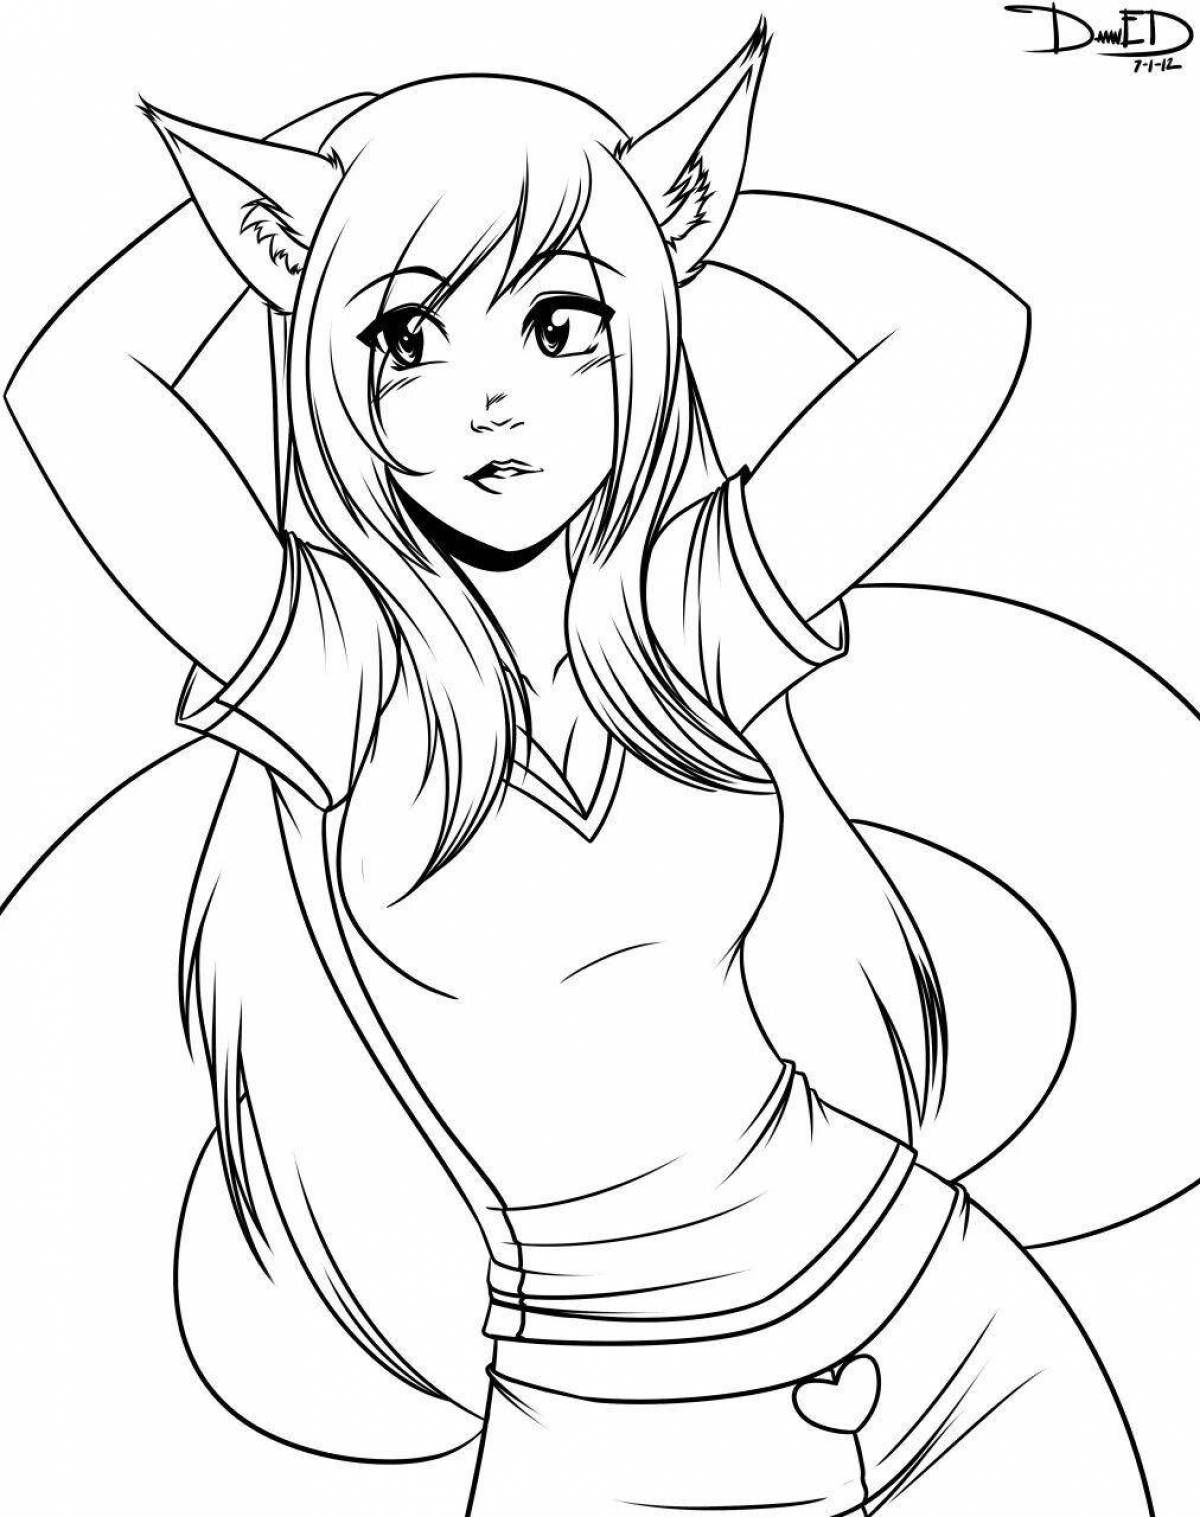 Colorful anime fox coloring page